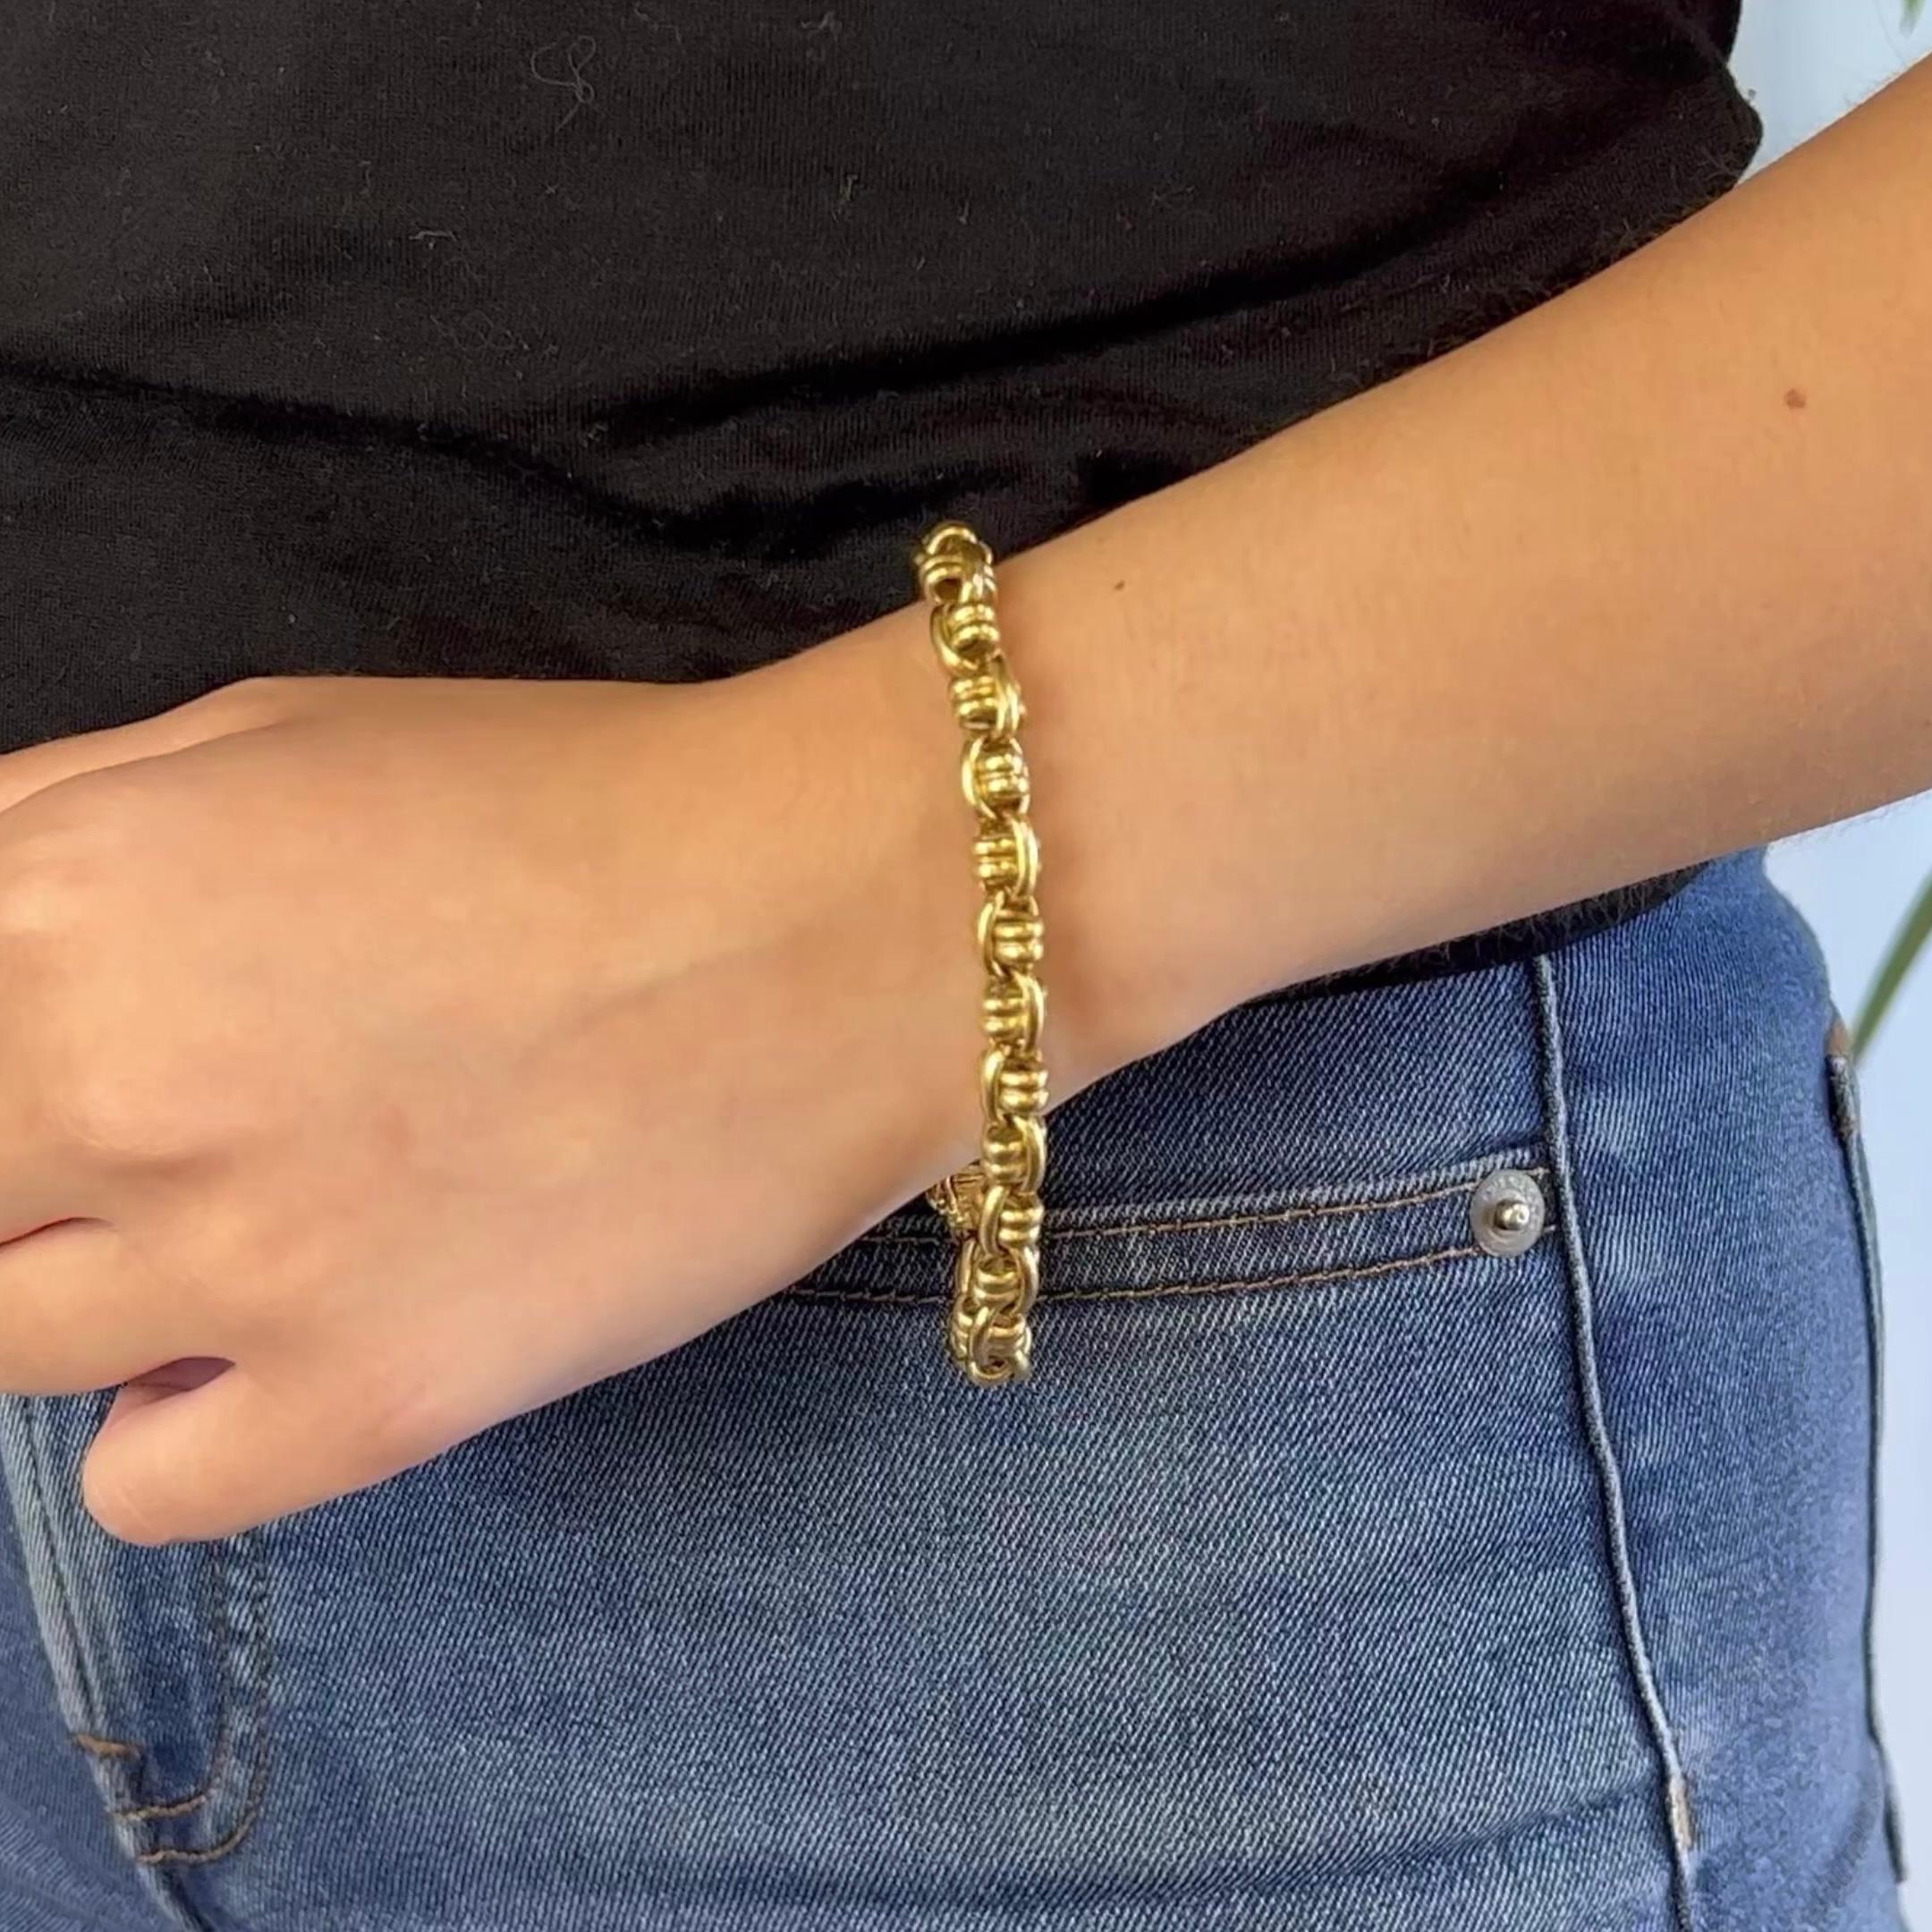 One Vintage Vesco Italian 18 Karat Yellow Gold Bracelet. Crafted in 18 karat yellow gold, signed Vesco with Italian hallmarks. Circa 1990. The bracelet measures 8 inches in length. 

About this Item:  Elevate your jewelry game the moment you add